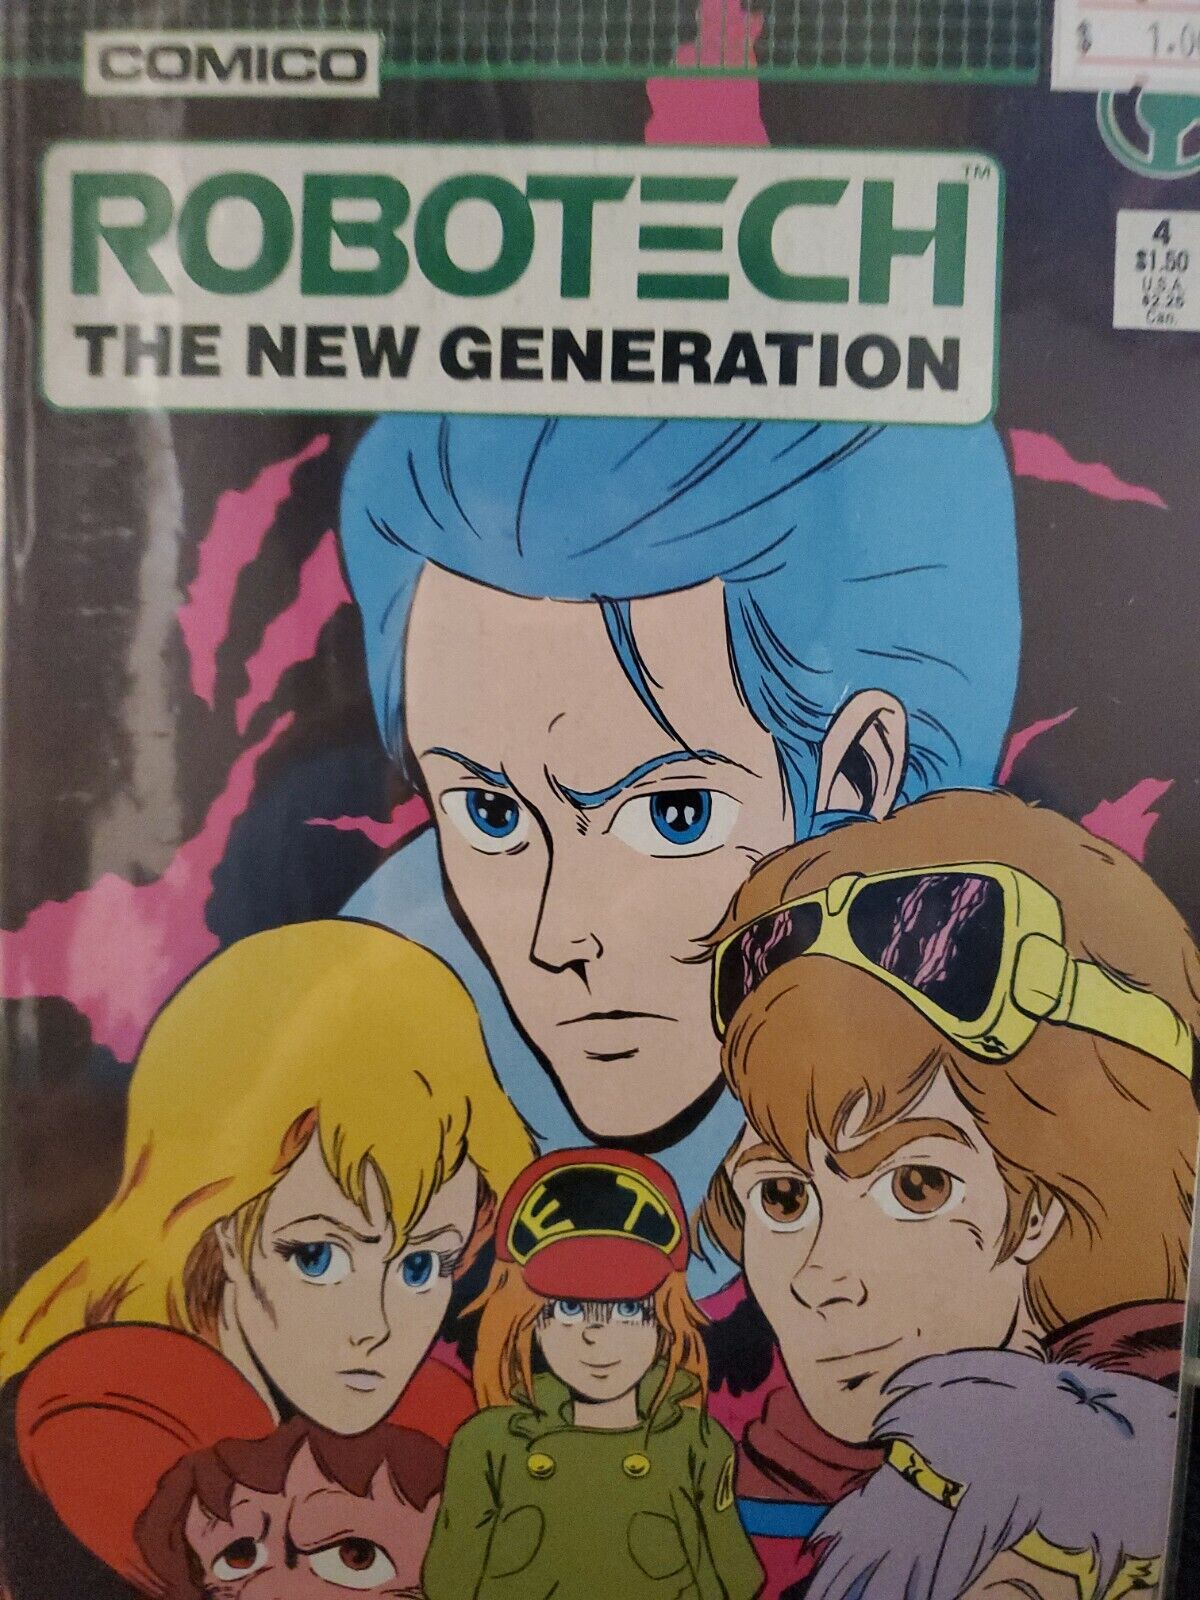 Robotech The New Generation #4